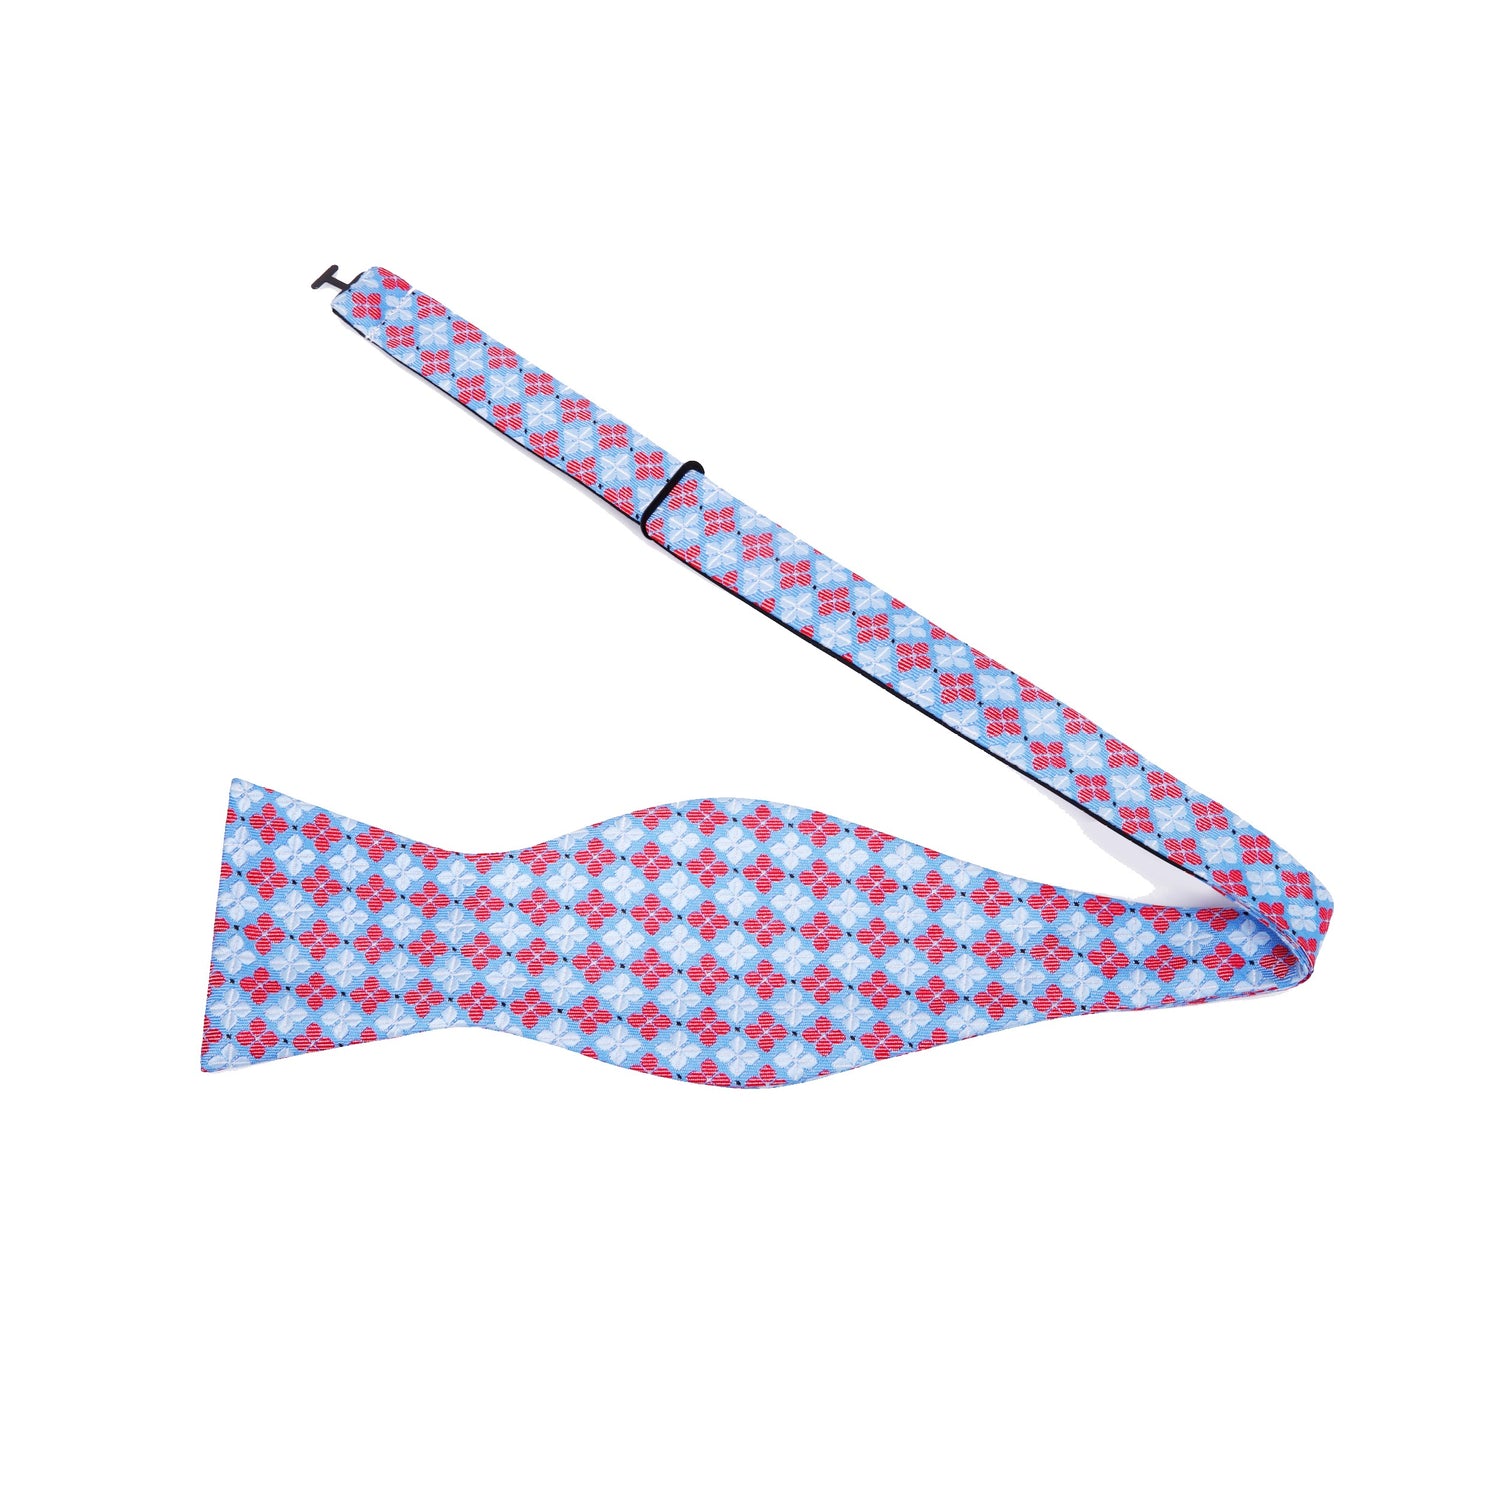 Untied View: A Light Blue, Light Red Geometric Clover Pattern Silk Self Tie Bow Tie, Pocket Square